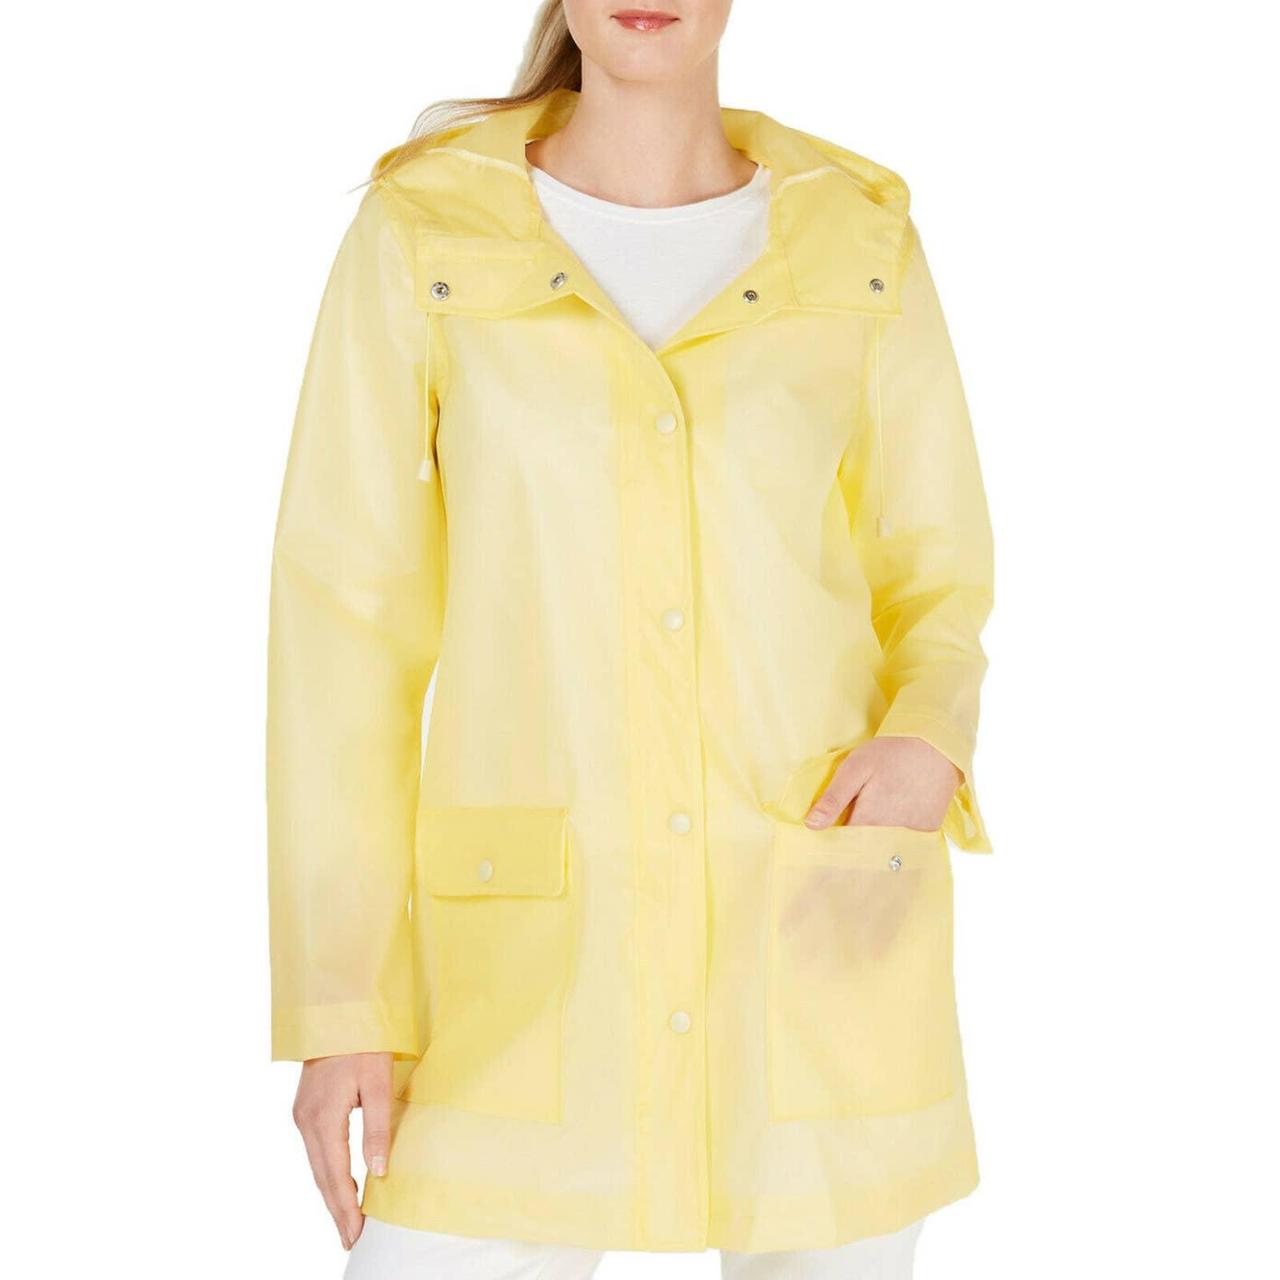 Product Image 1 - COLLECTION B WOMEN'S YELLOW HOODED